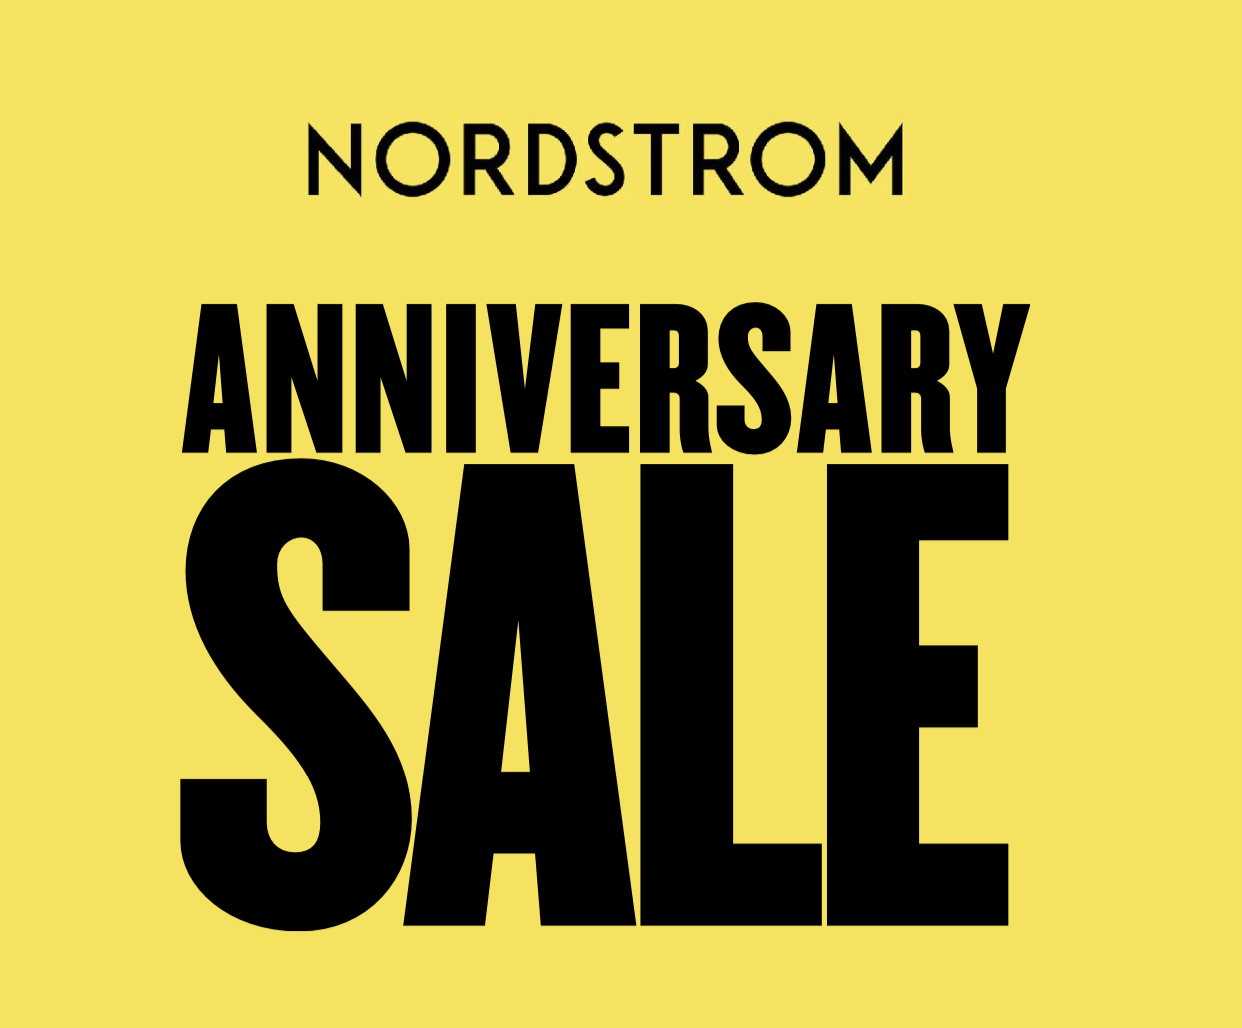 The Nordstrom Anniversary Sale 2020